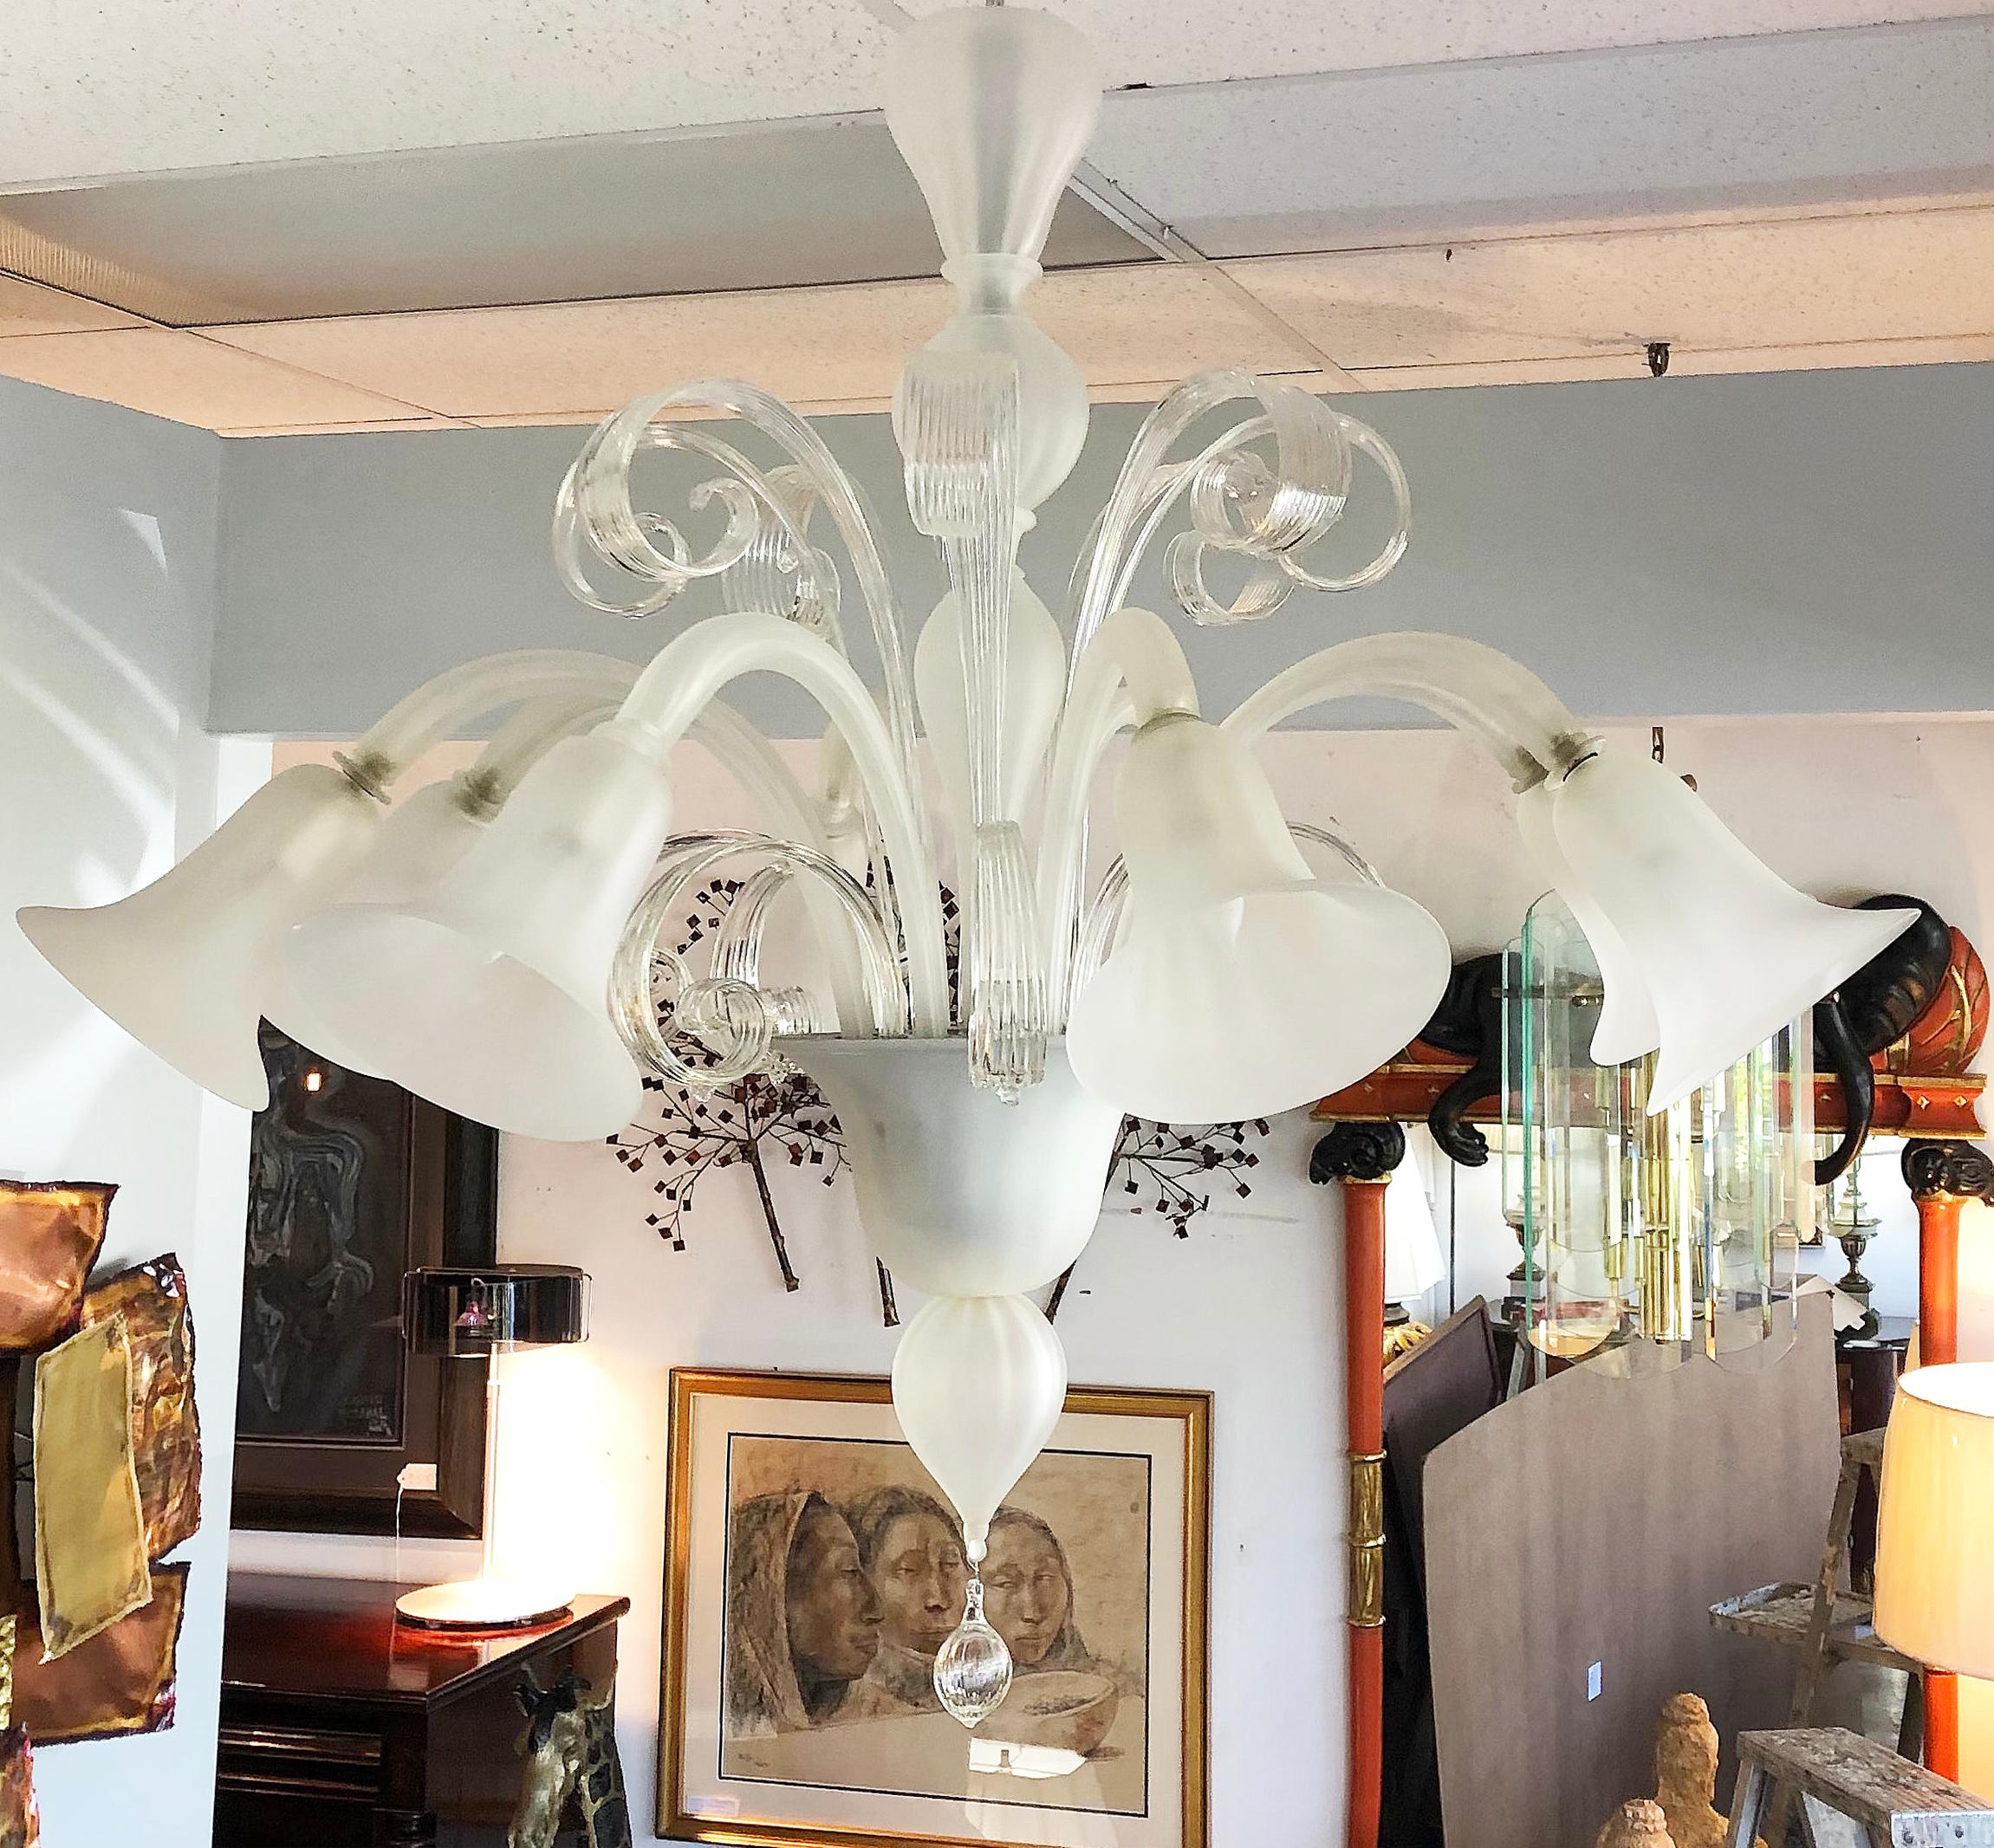 Vintage Murano frosted glass eight-arm chandelier with new wiring

Offered for sale is a vintage Murano frosted glass eight-arm chandelier that has been newly wired. The fixture accommodates chandelier-size bulbs and has a ring for hanging and